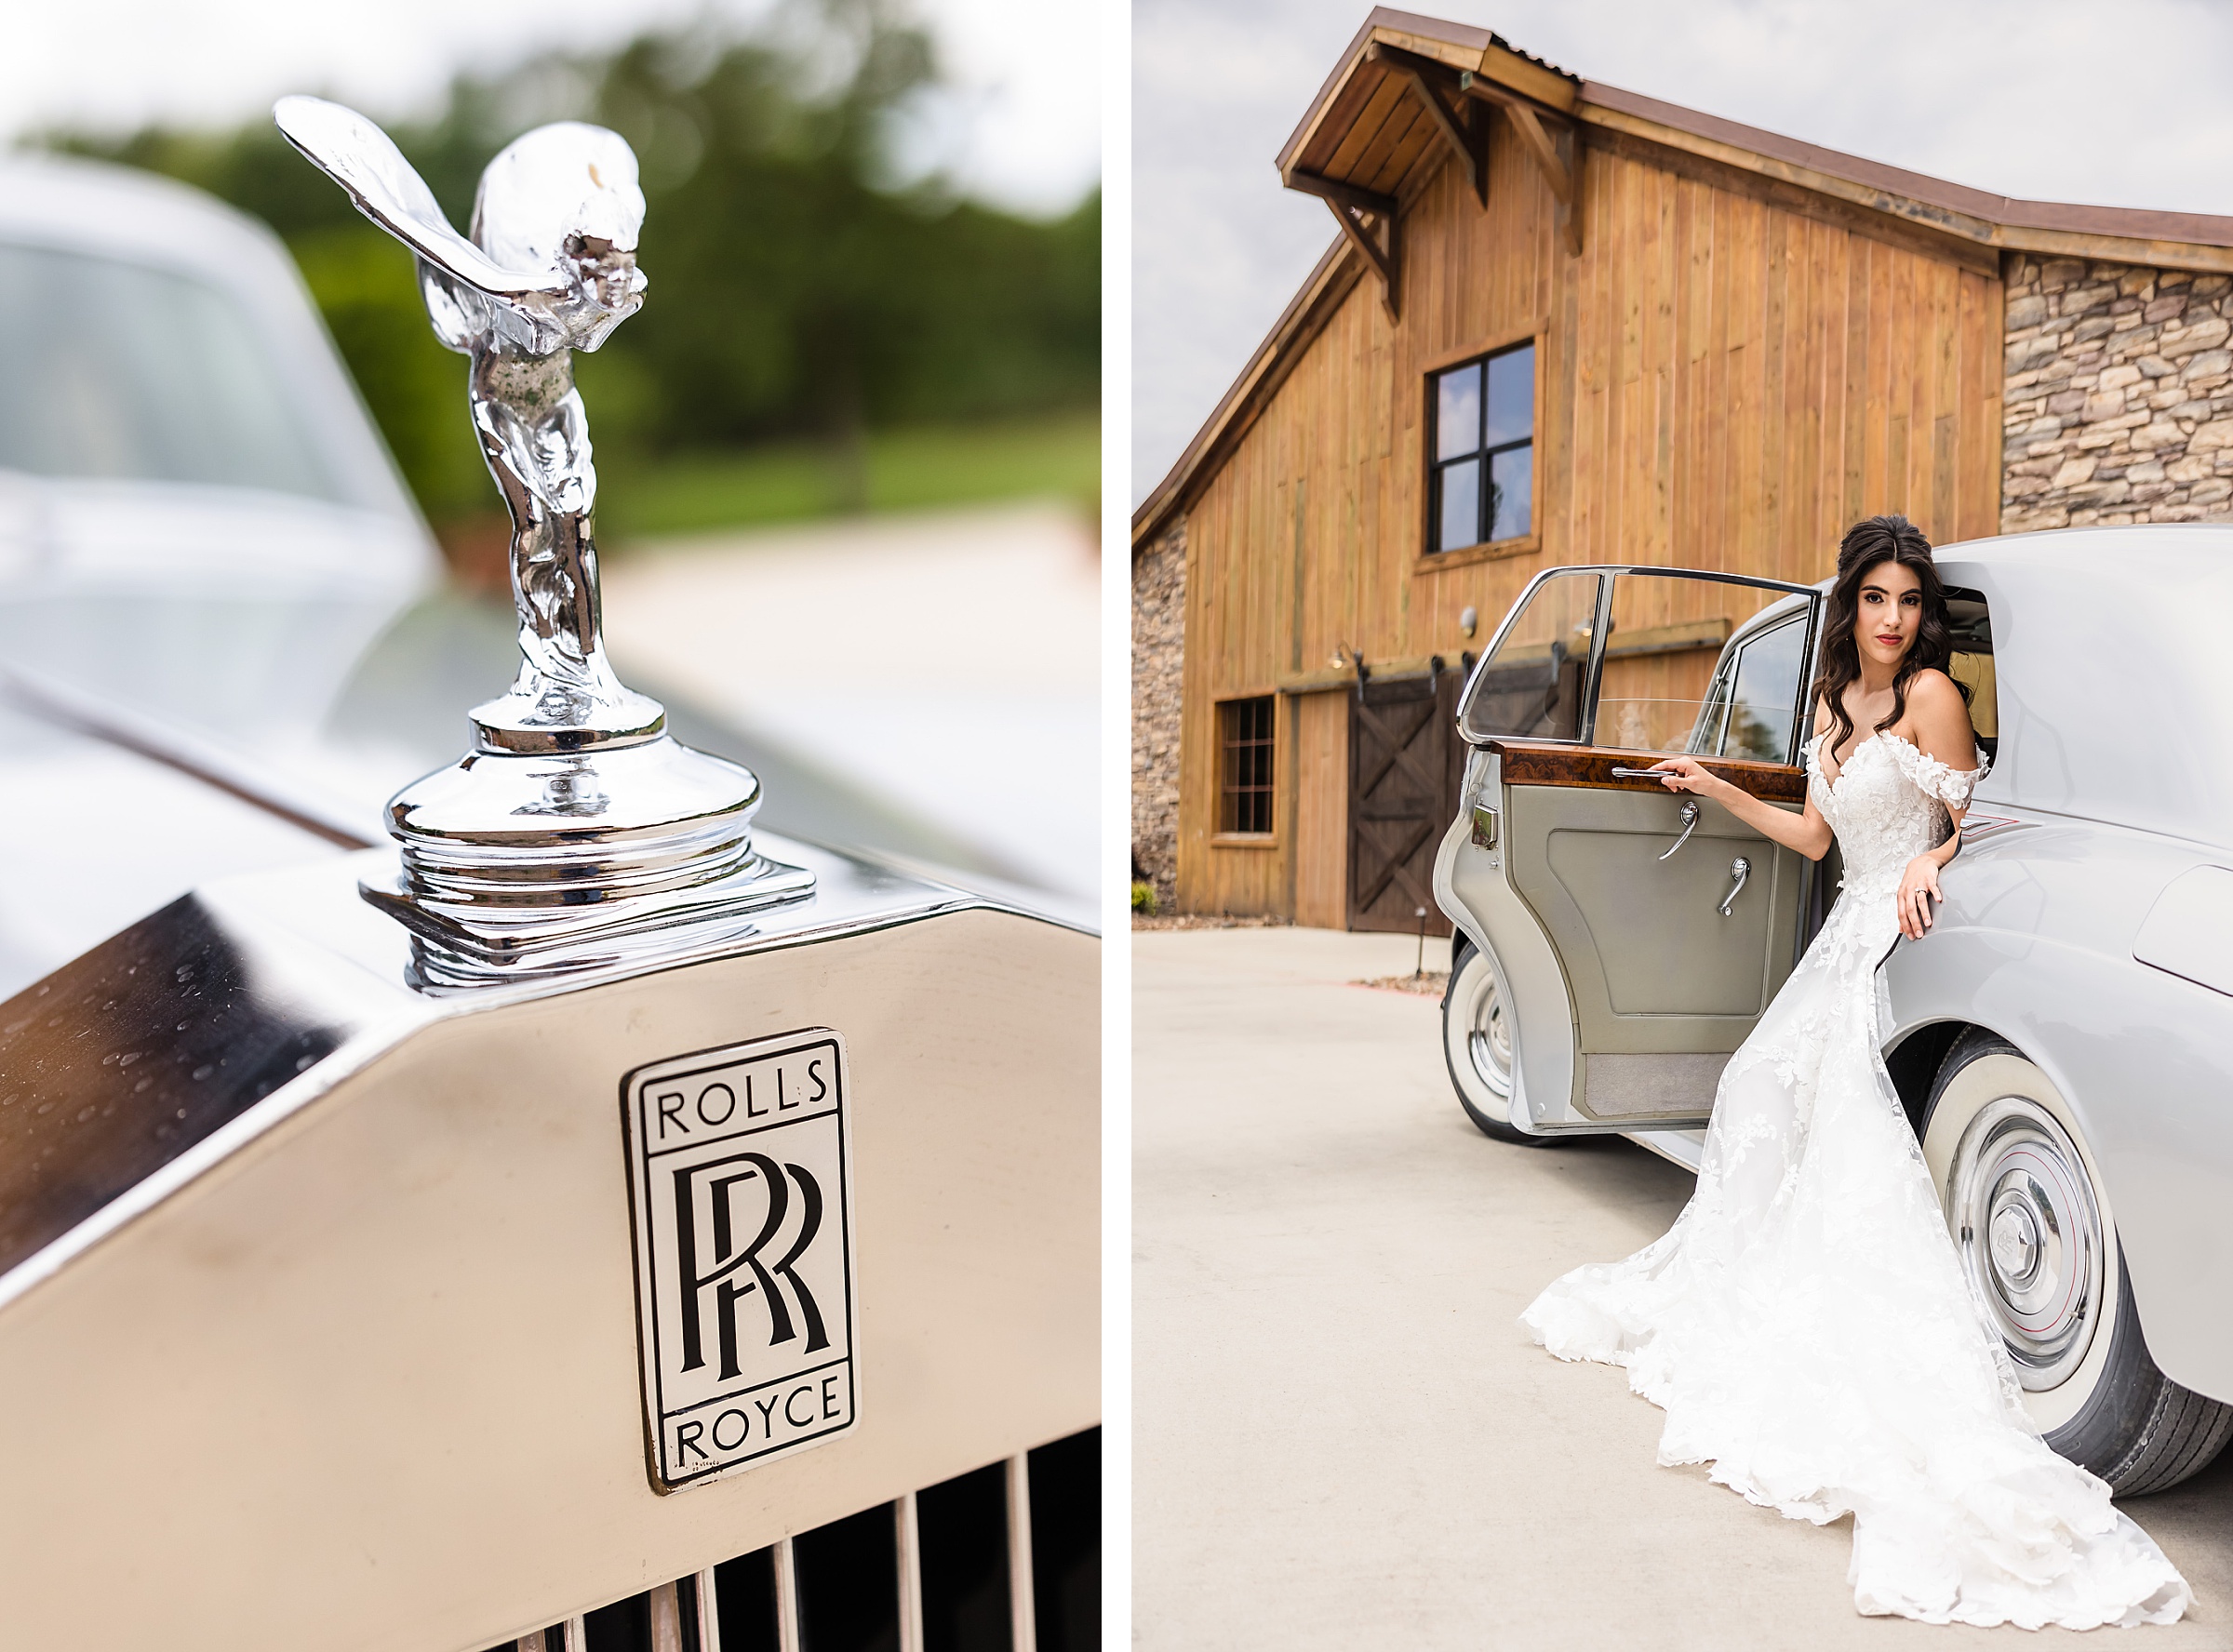 Bride and Groom celebrate their wedding at the Big Sky Barn in Montgomery, Texas.